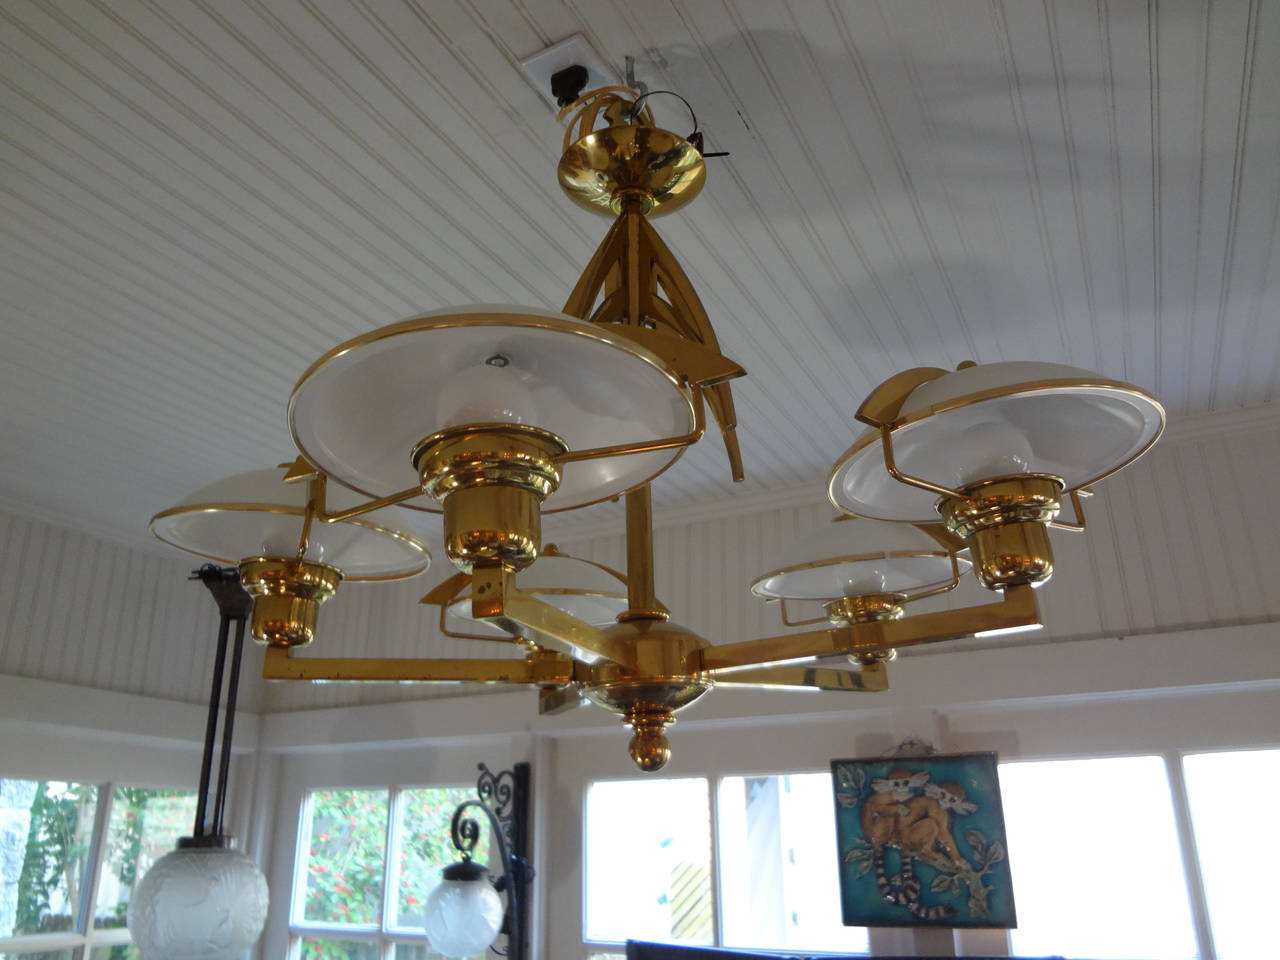 Unusual Italian Mid-Century Modern Stilnovo style five-light brass chandelier with glass shades. This Italian Mid-Century Modern brass chandelier has been newly wired for the U.S. market.
This fixture can be used flushmount for use on homes with